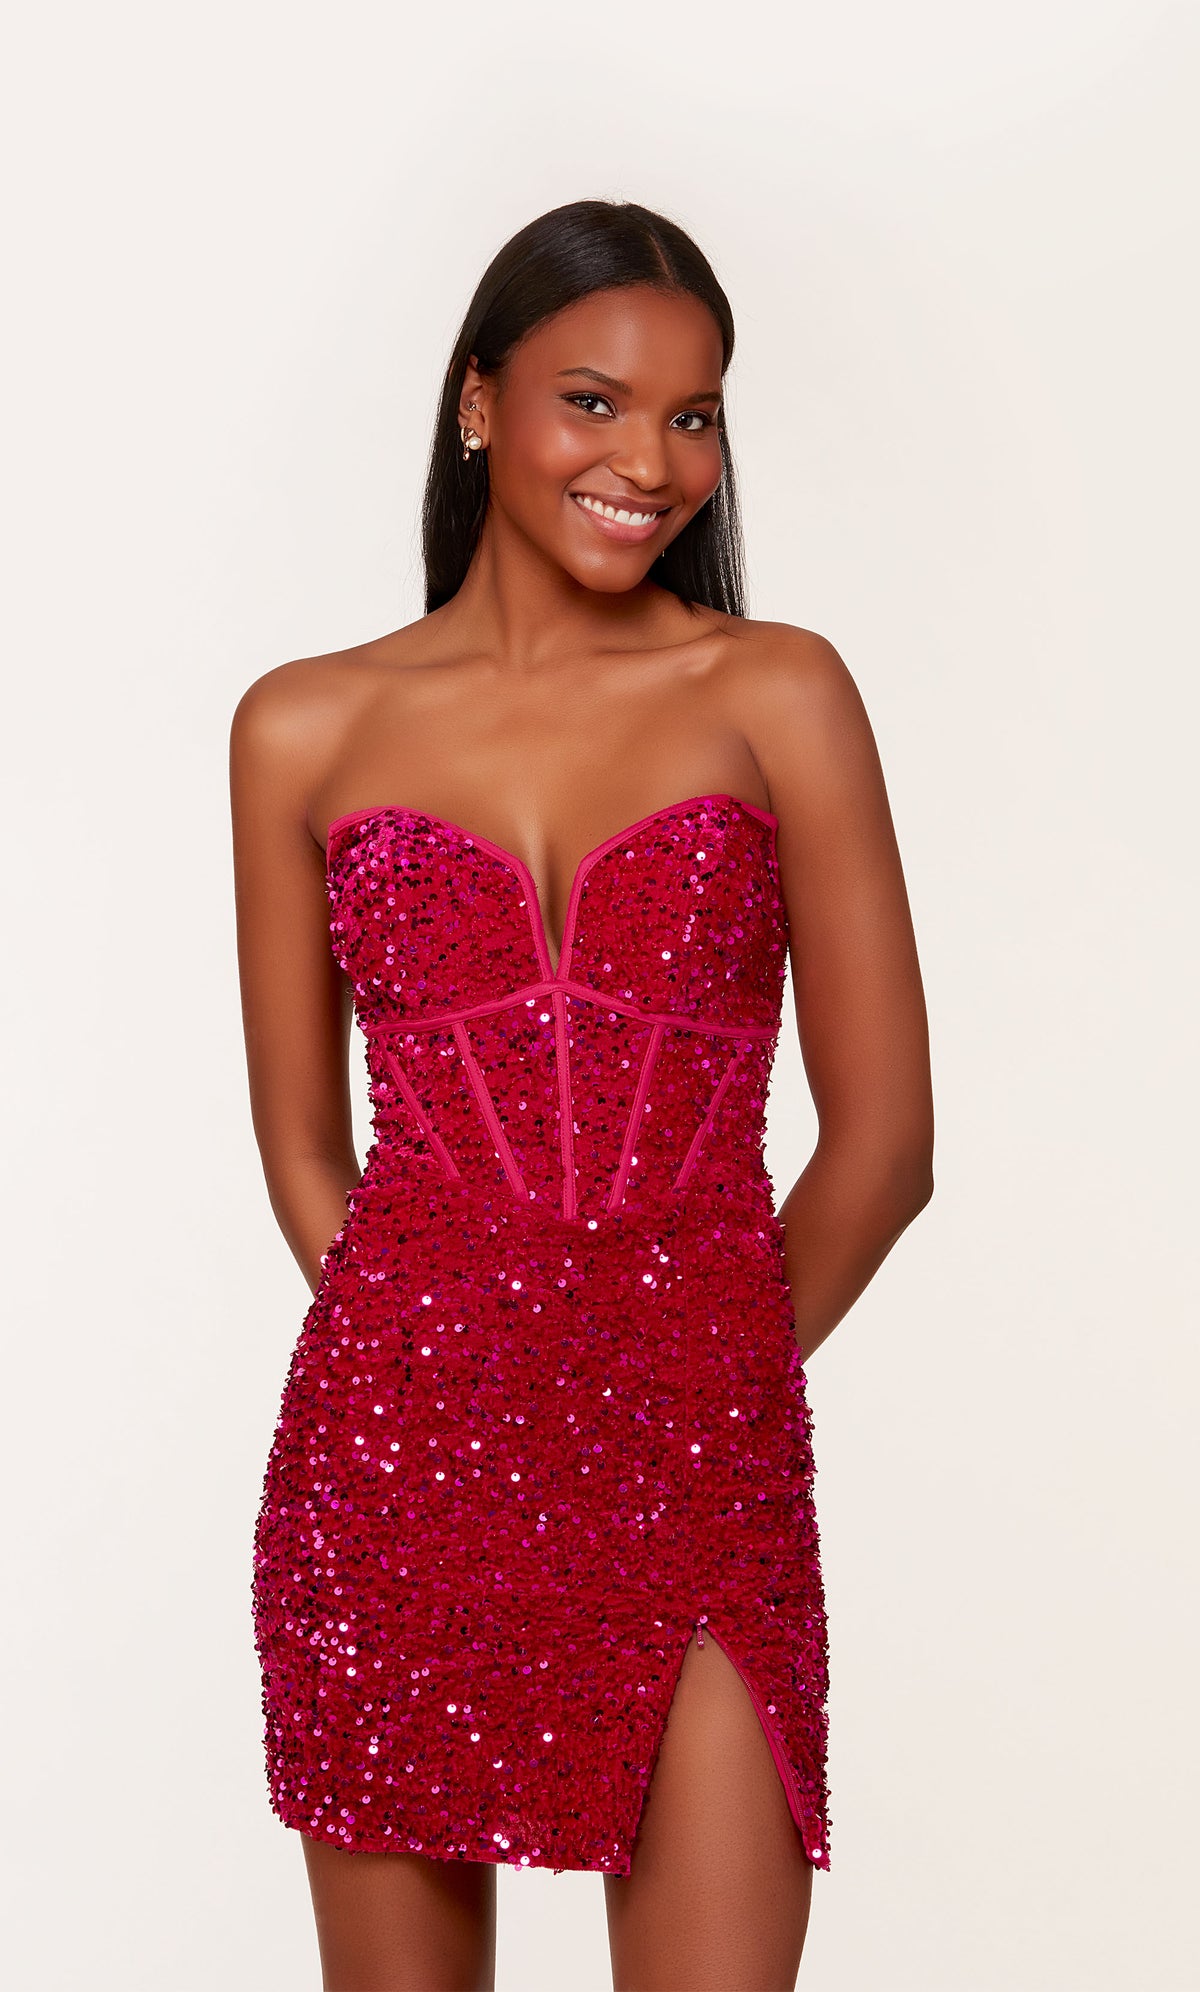 A short corset prom dress in iridescent, raspberry colored sequins. The dress features a strapless neckline, a zipper side slit, and a lace-up back.